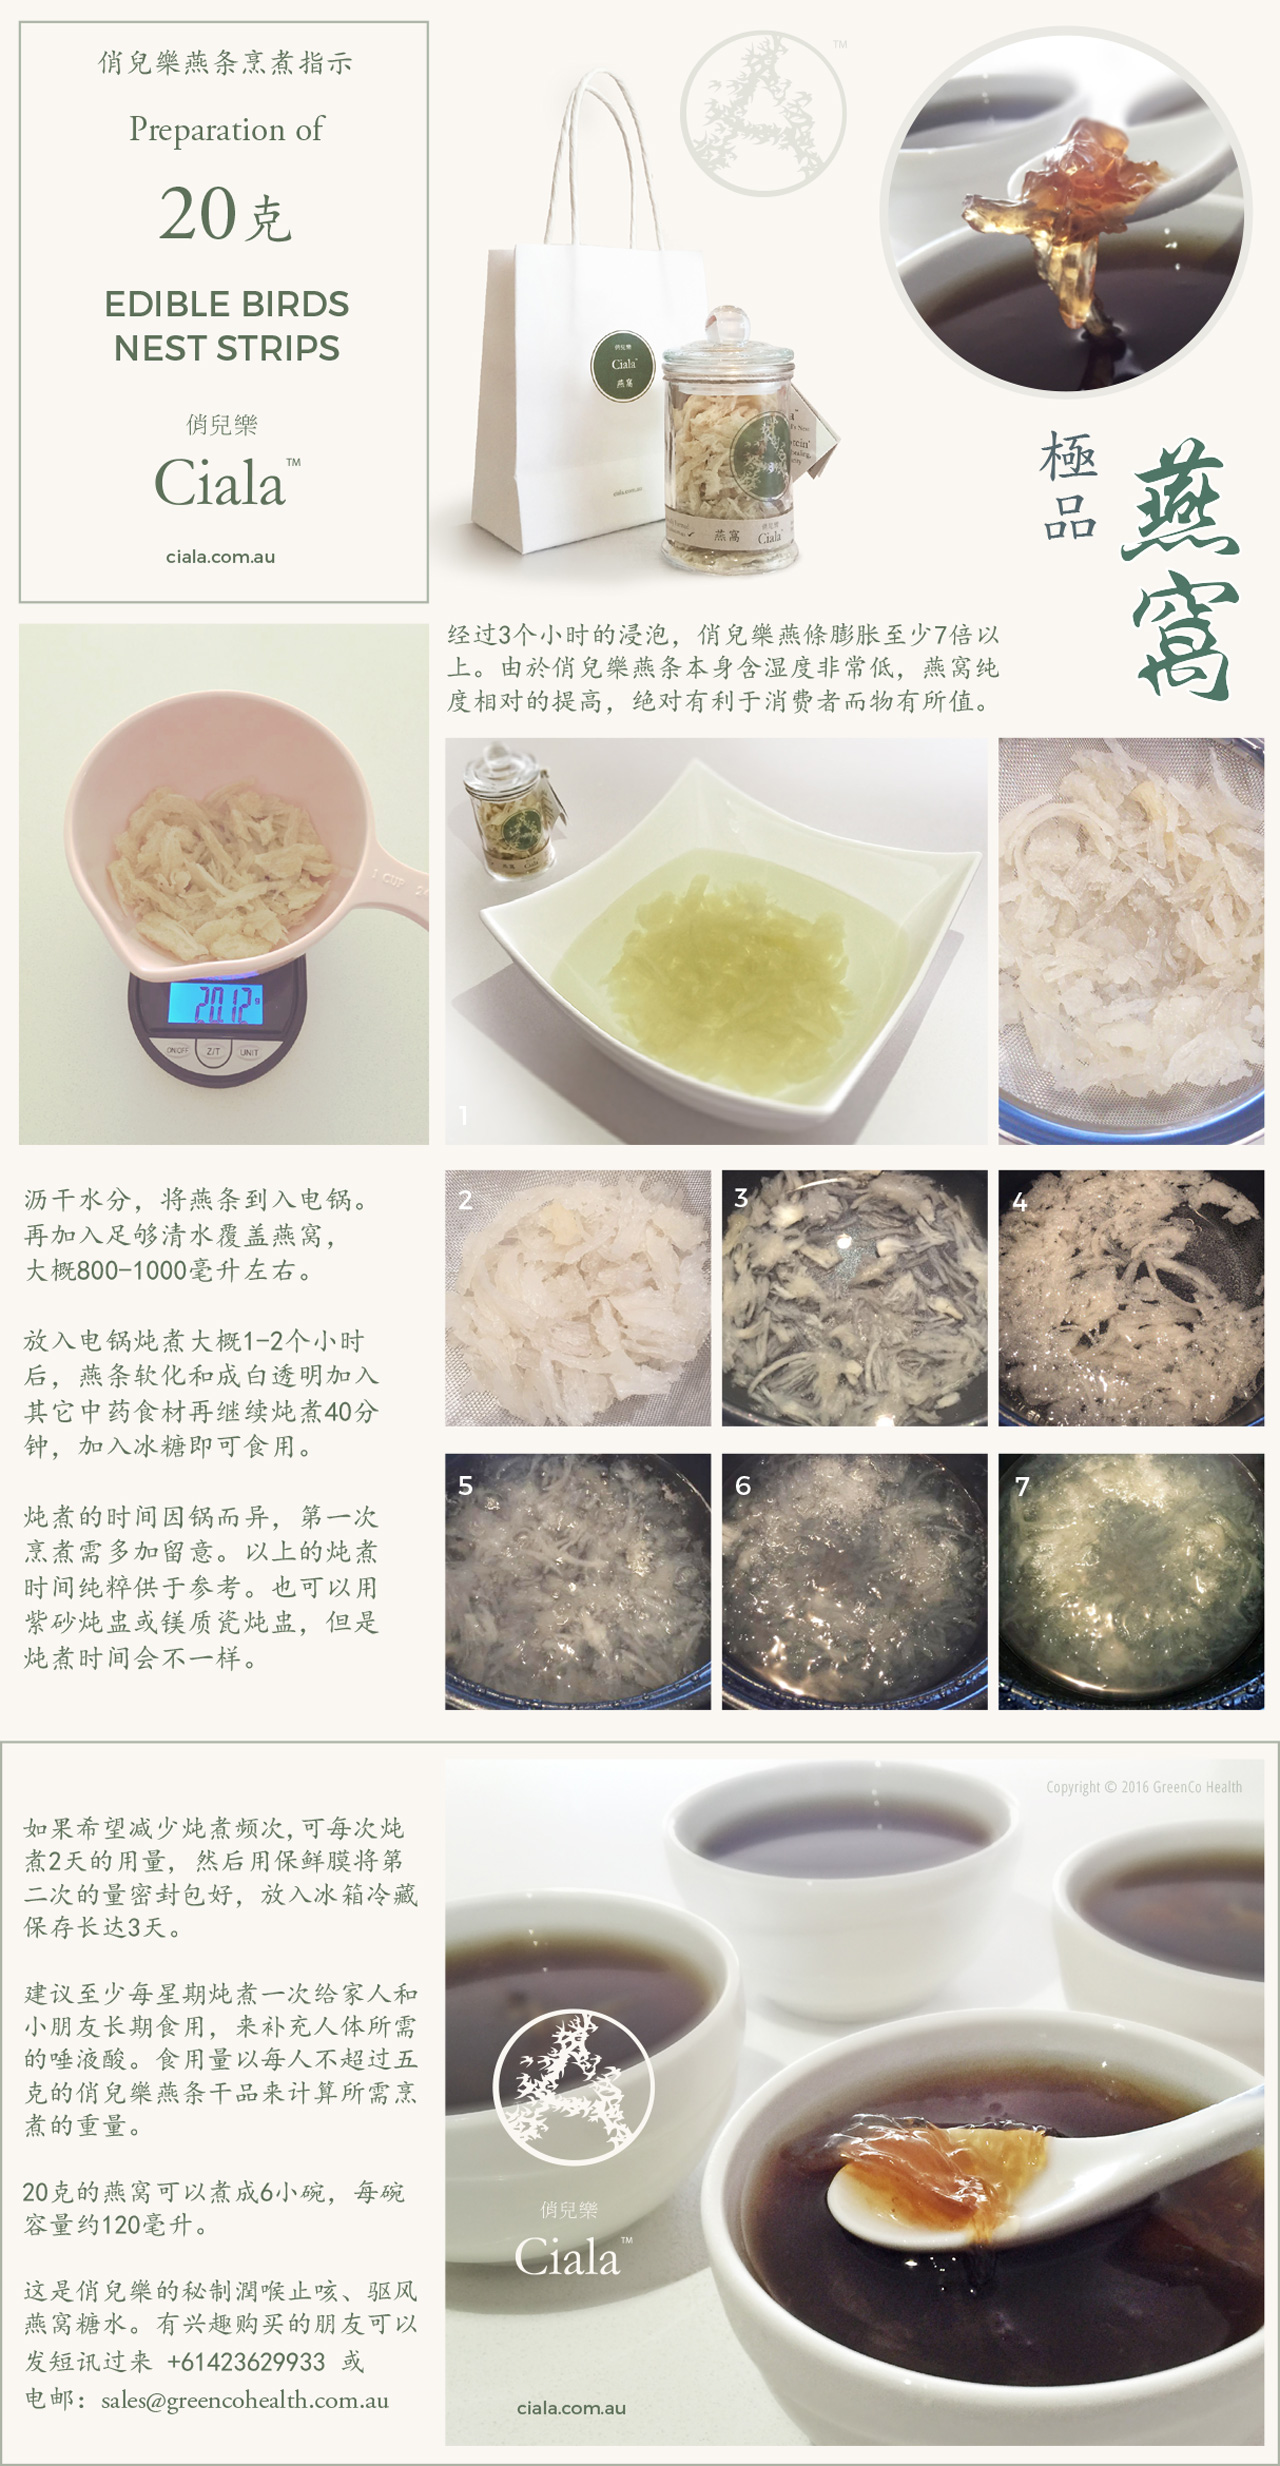 How to cook edible birds nest at home Yan Wo